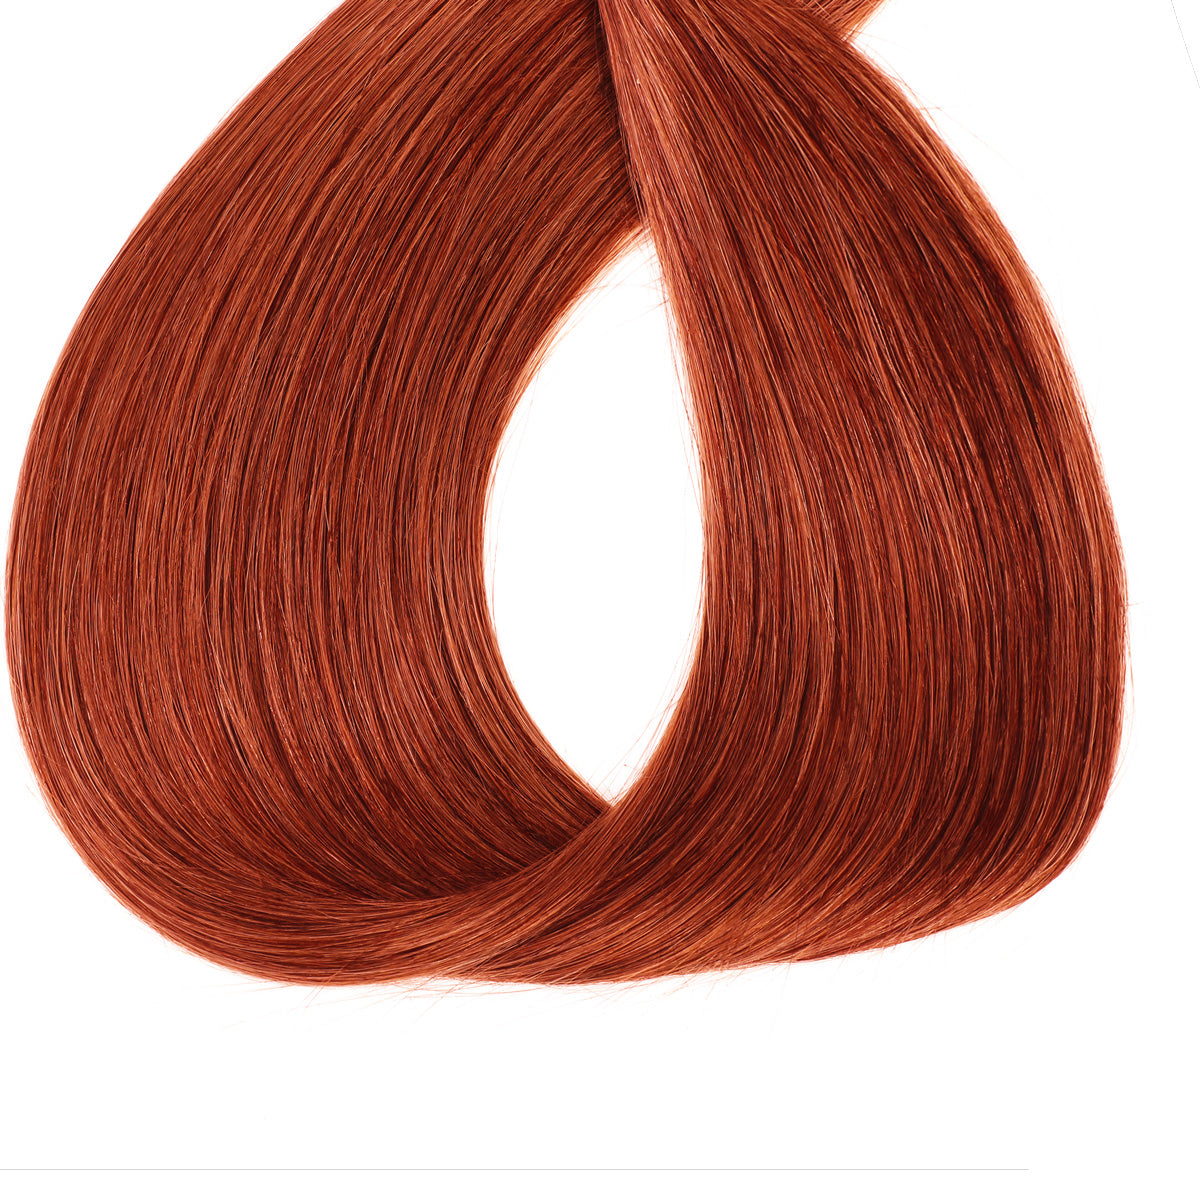 Copper Hair Extensions for the perfect color match